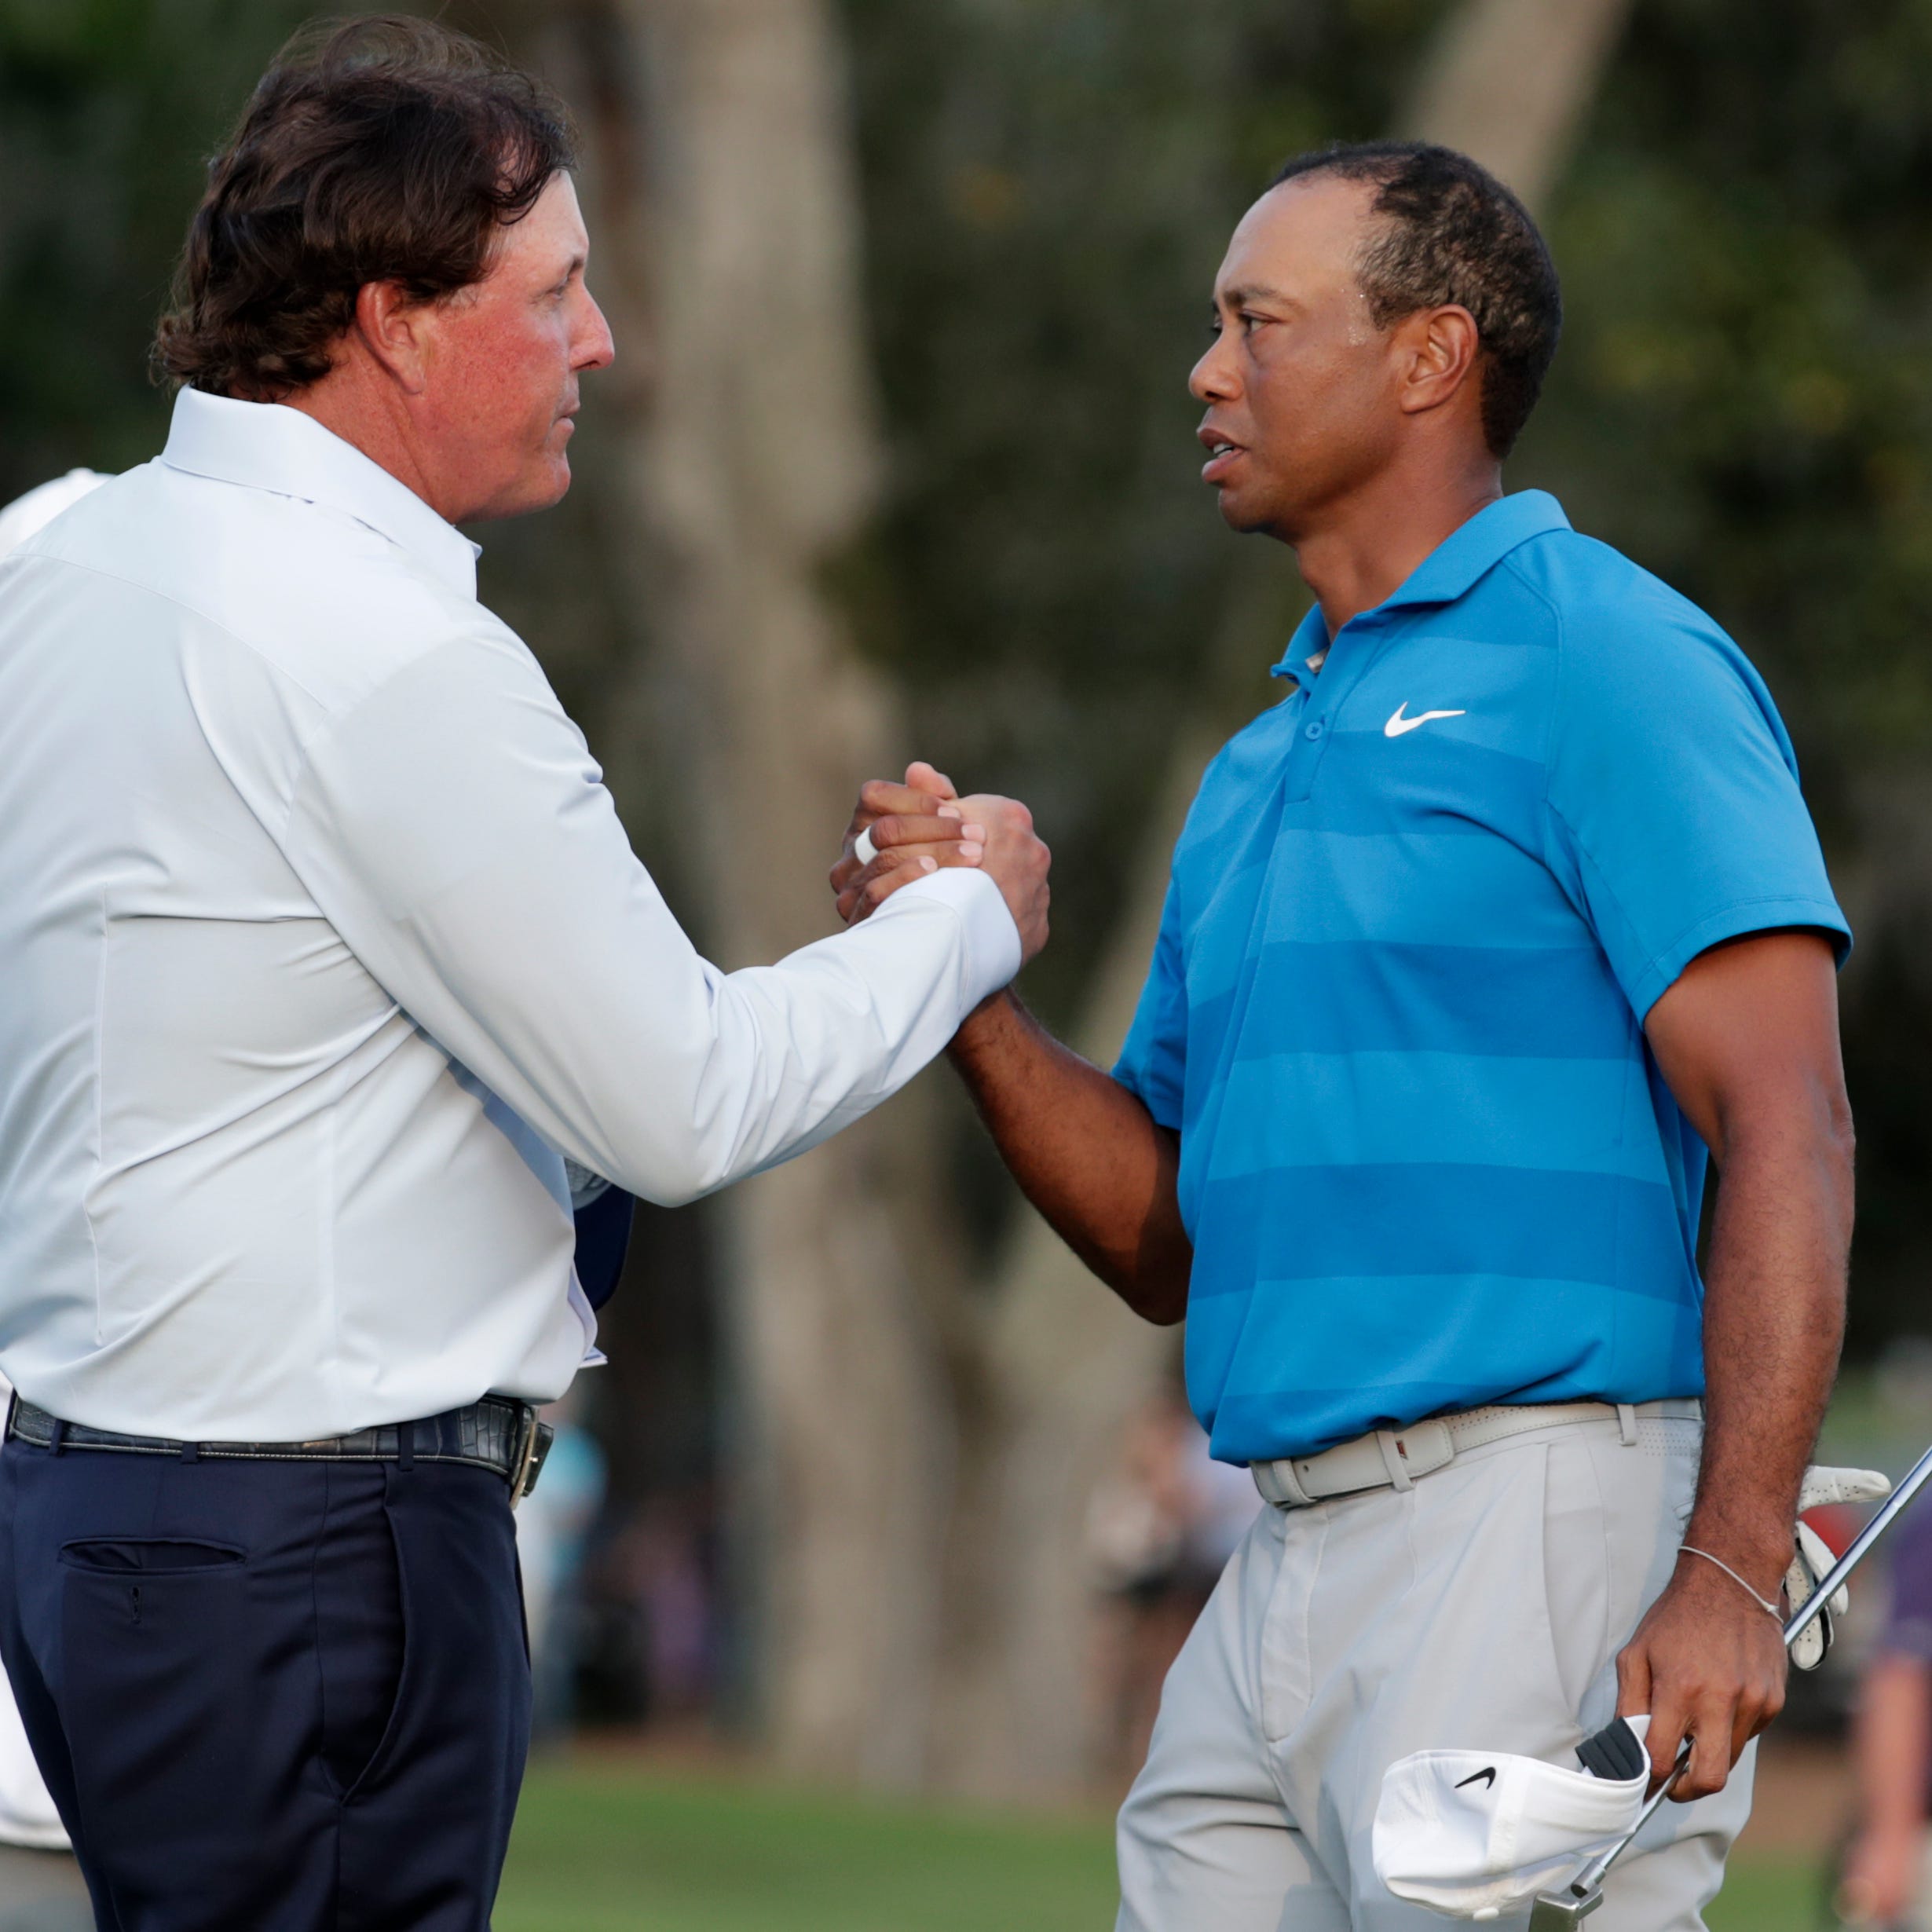 FILE - In this May 10, 2018, file photo, Phil Mickelson, left, and Tiger Woods shake hands after the first round of the Players Championship golf tournament, in Ponte Vedra Beach, Fla.  The winner-take-all match between Tiger Woods and Phil Mickelson